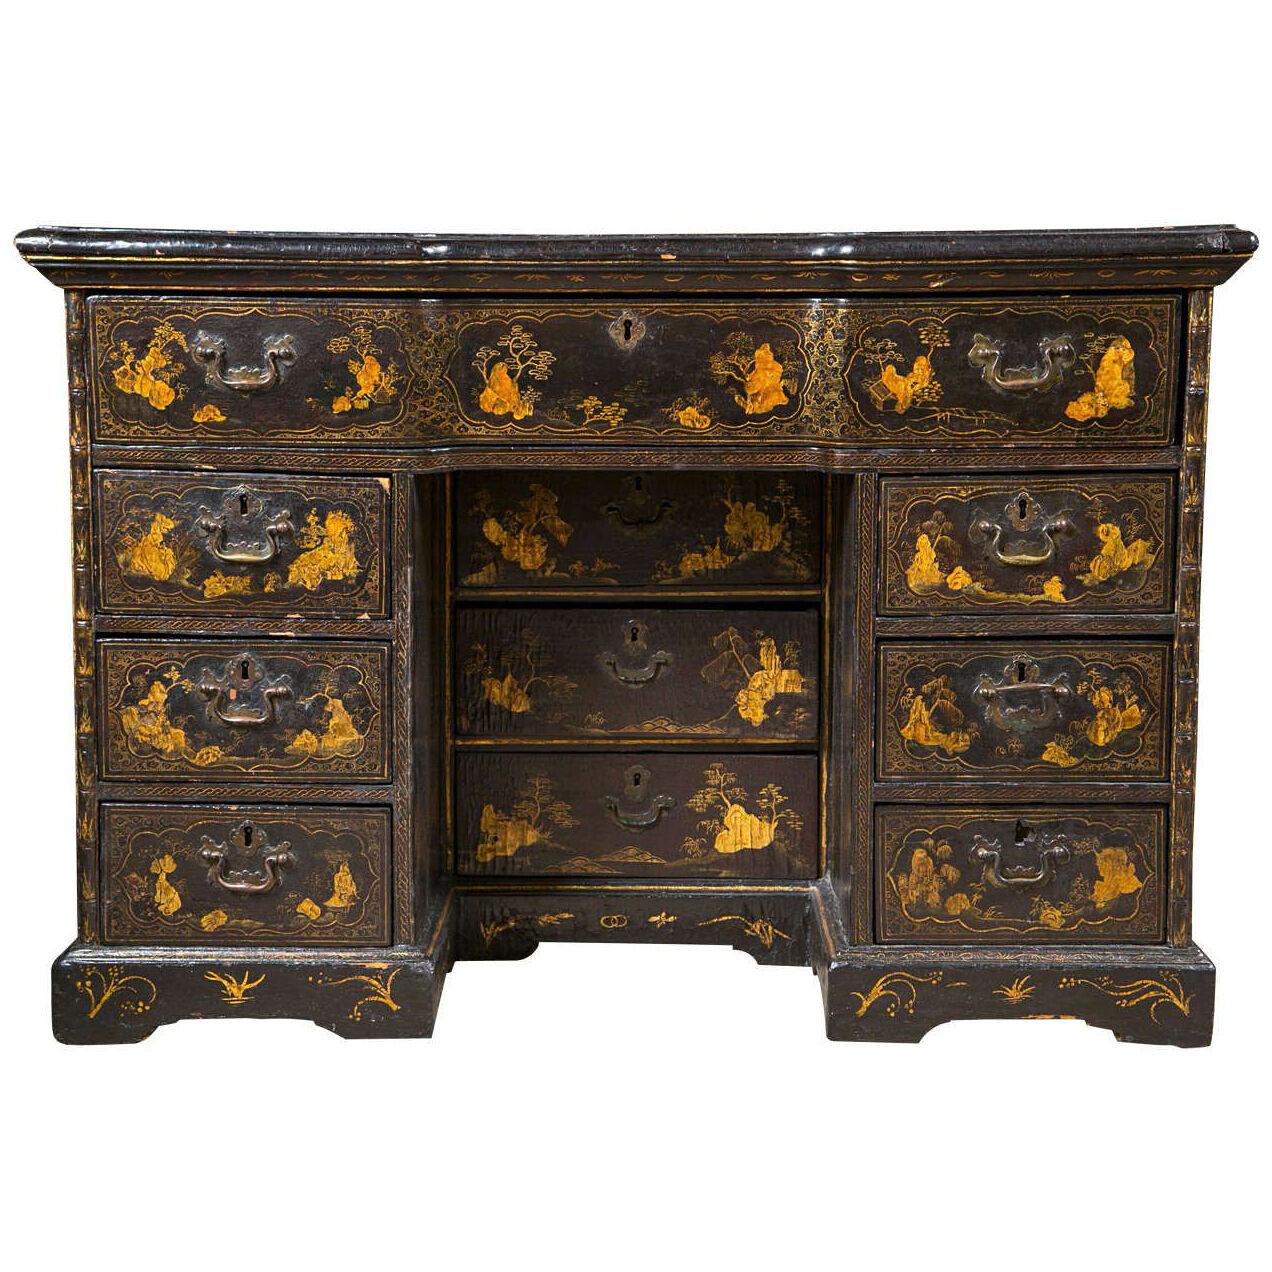 18th-19th Century Chinese Export Chinoiserie Lacquer Decorated Knee Hole Desk